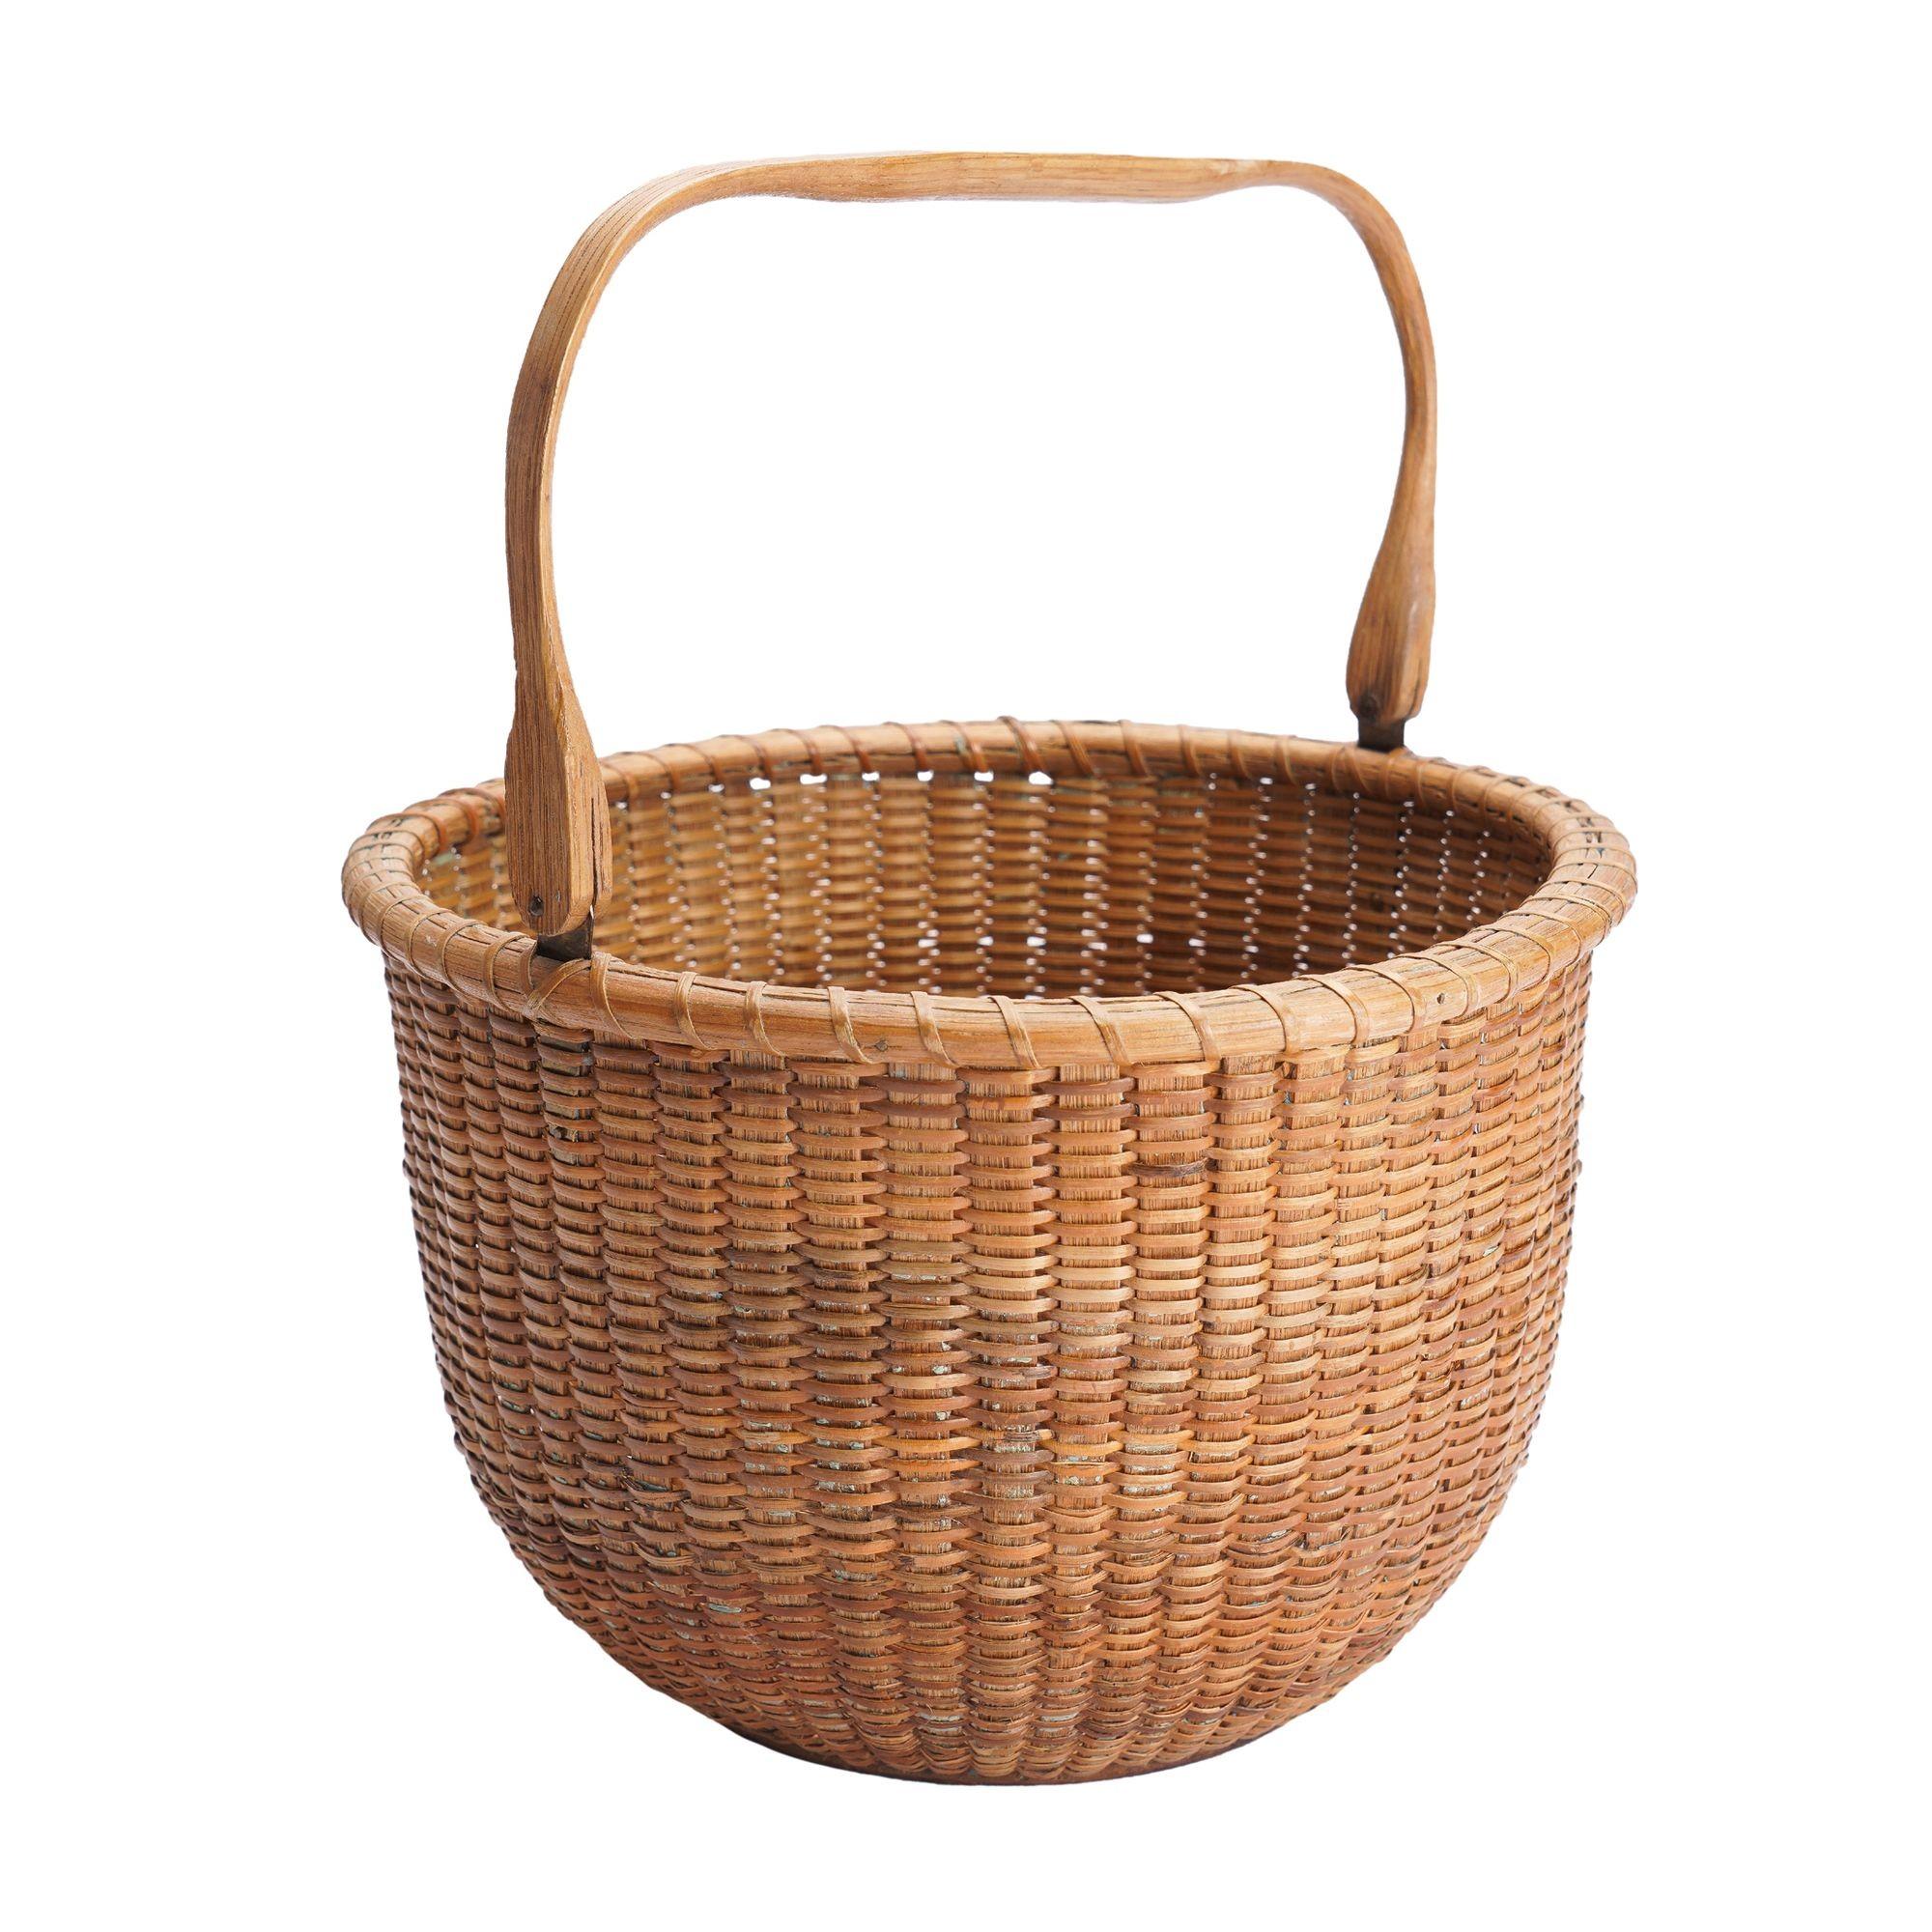 Nantucket lighthouse basket attributed to Mitchy Ray, 1900-50 For Sale 2